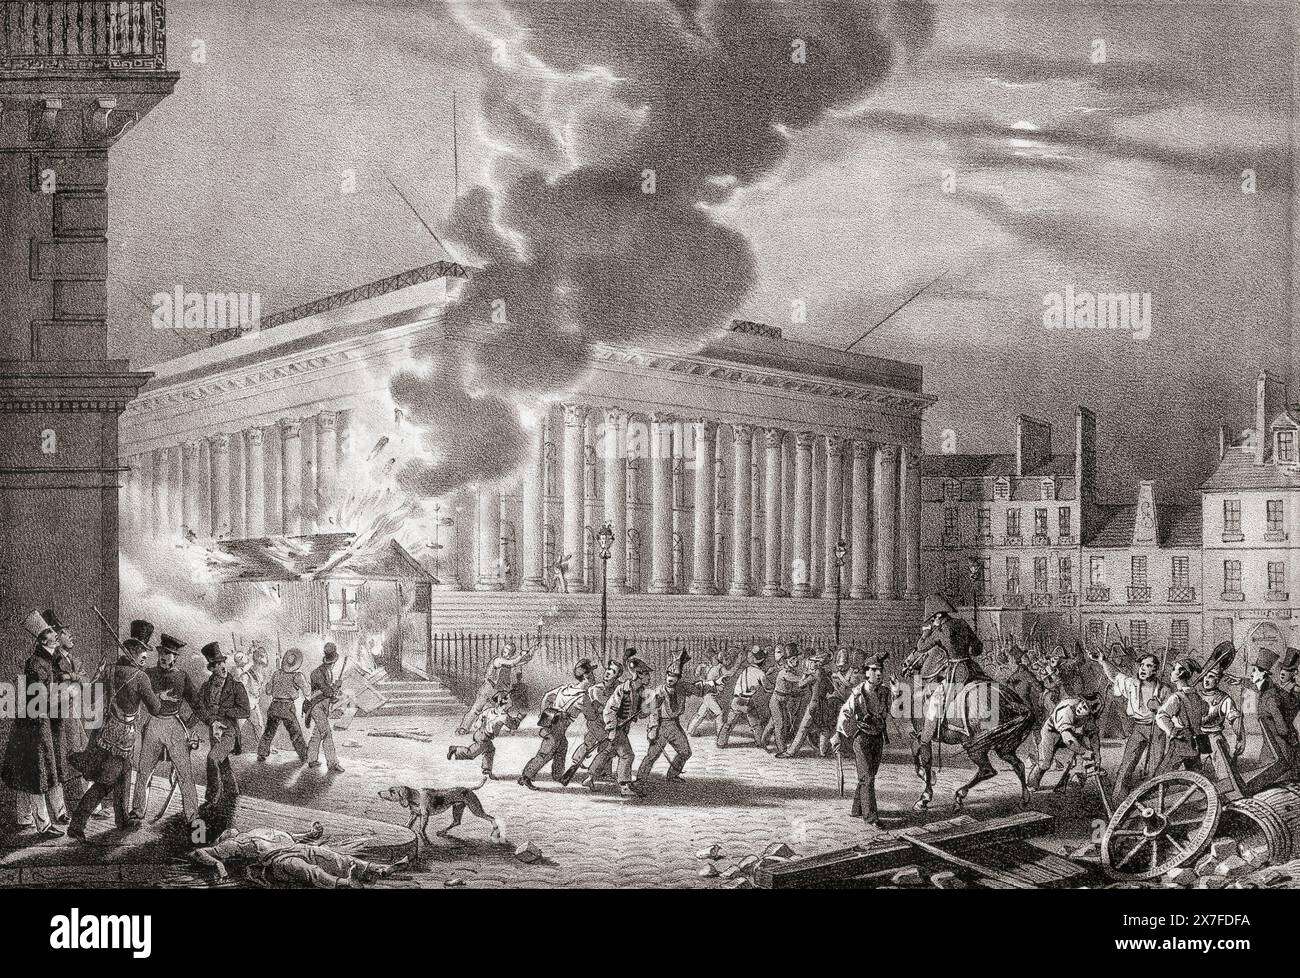 Fire in the police guardhouse, Place de la Bourse, Paris, 1830, during The French Revolution of 1830, aka The July Revolution, Second French Revolution, or Trois Glorieuses, a second French Revolution after the first in 1789.  After a 19th century print. Stock Photo